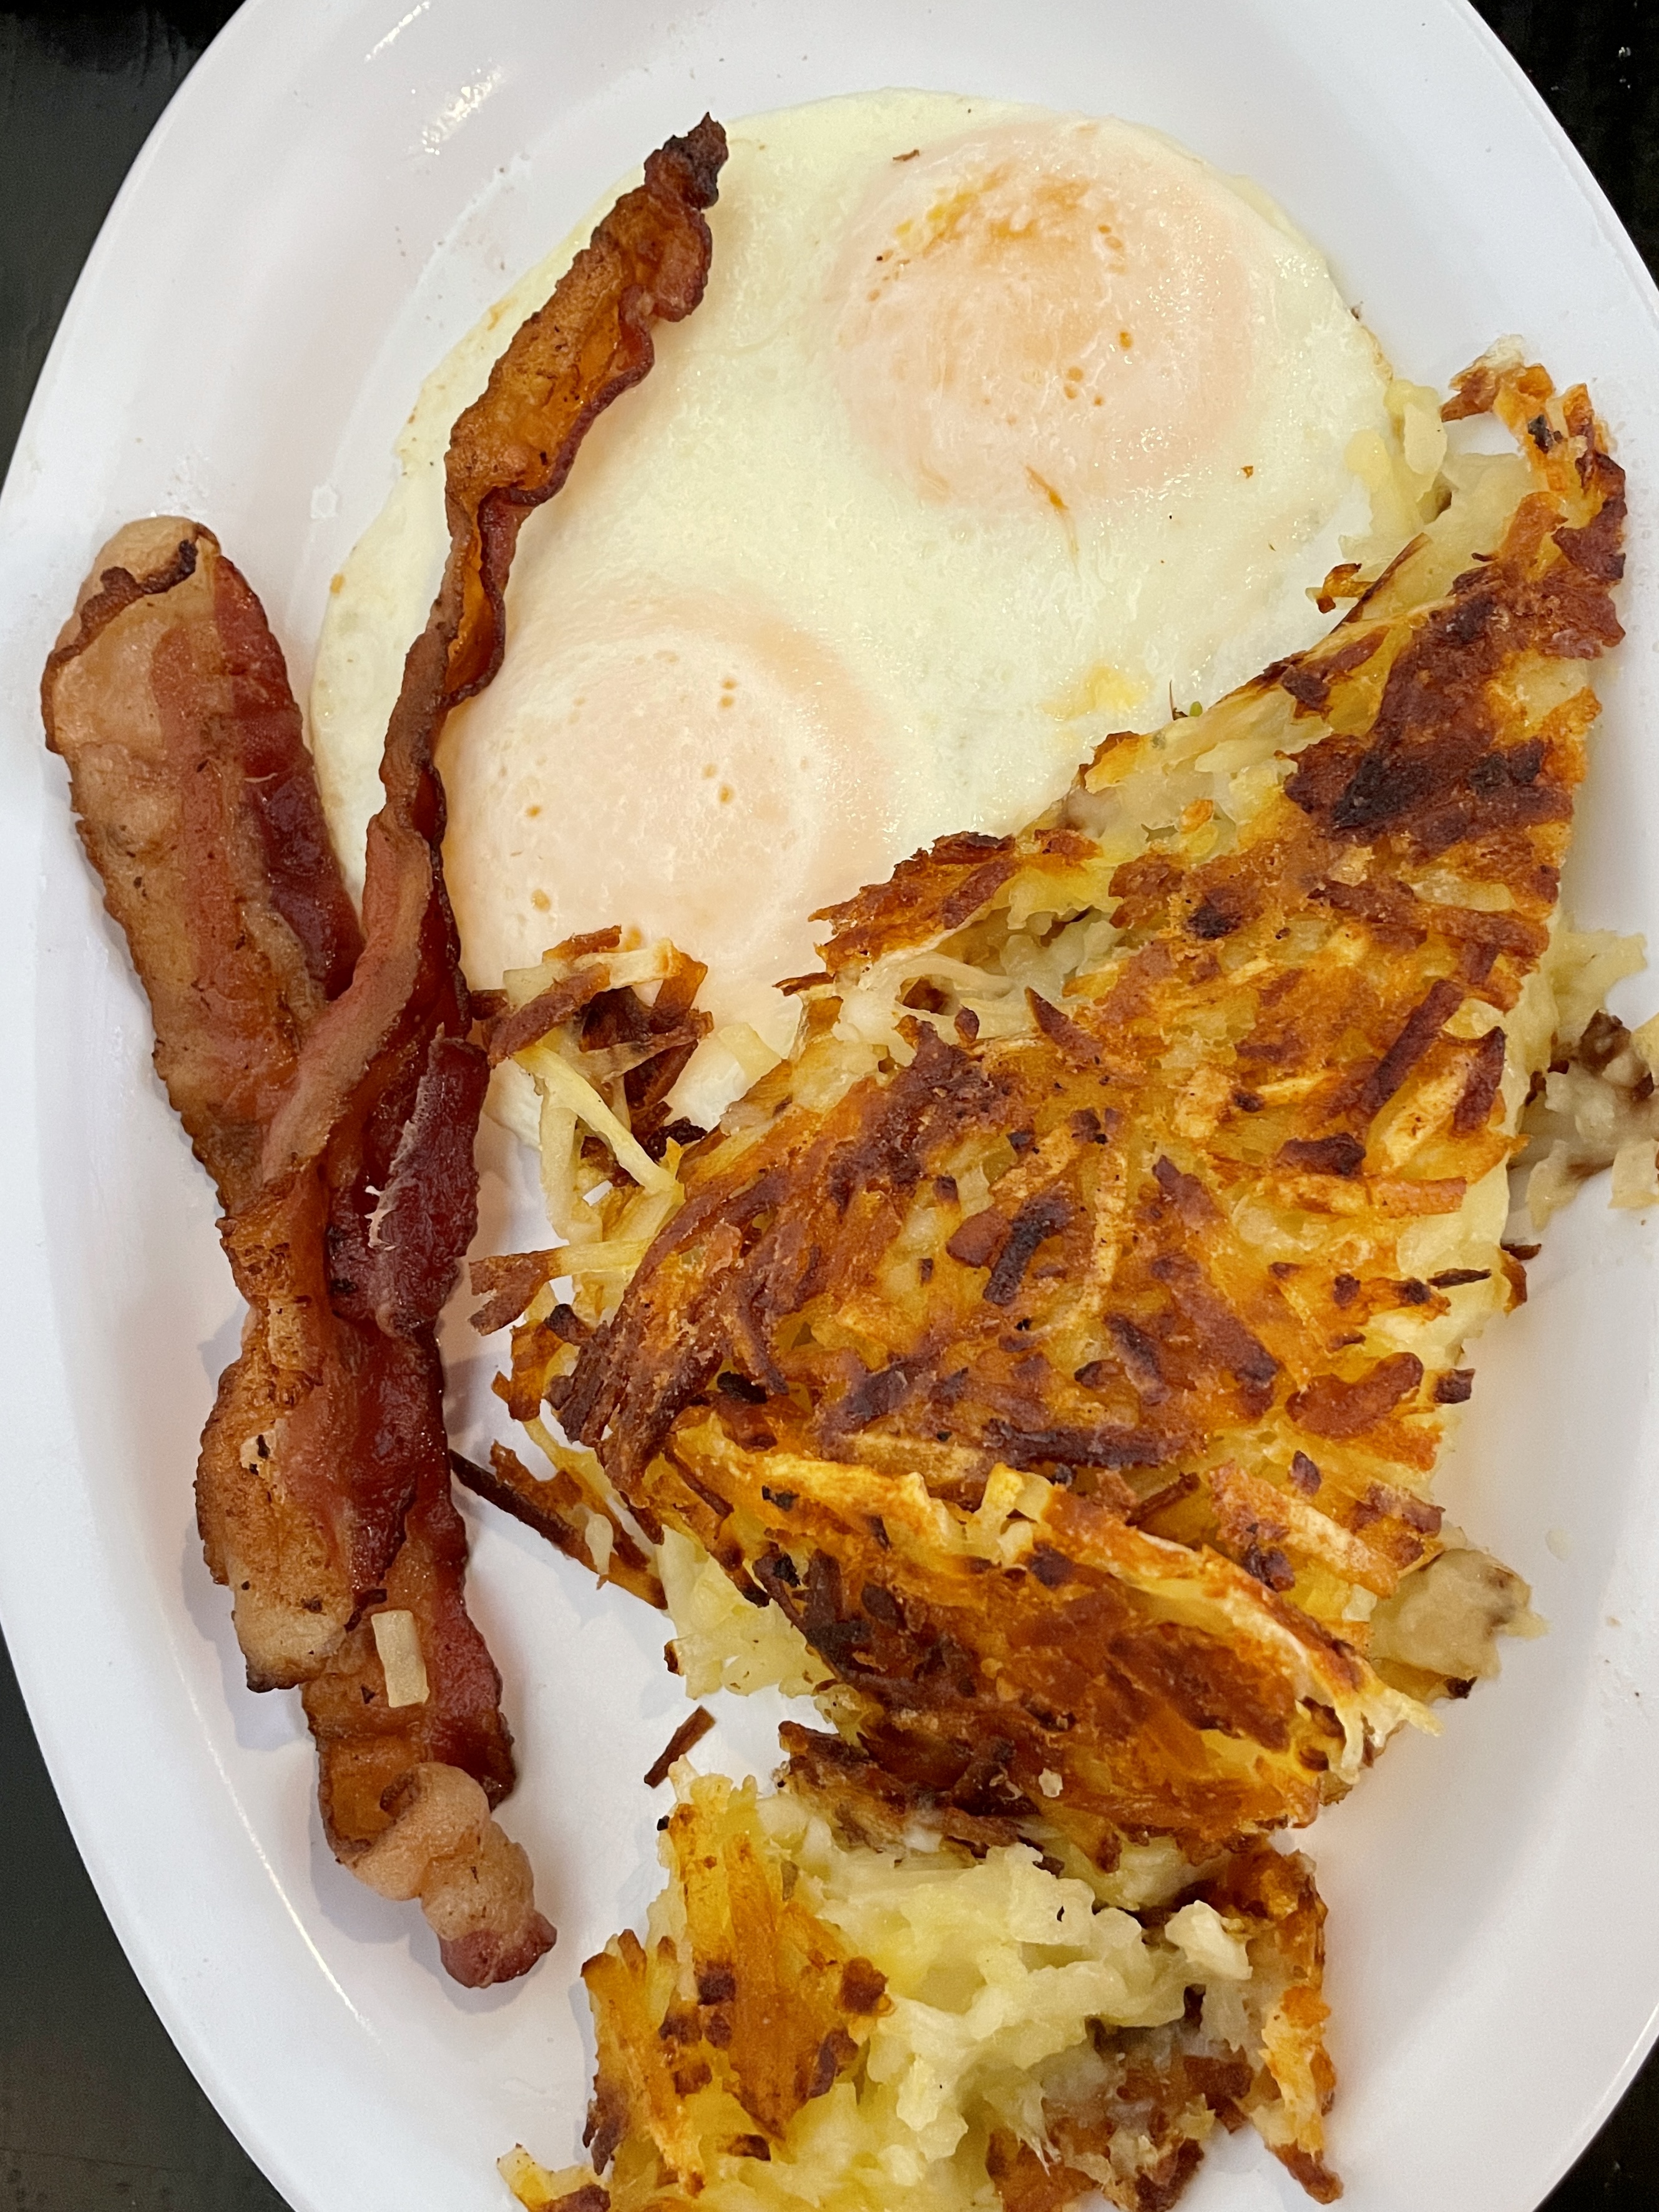 Ohana Special with two over easy eggs, bacon and hashbrowns